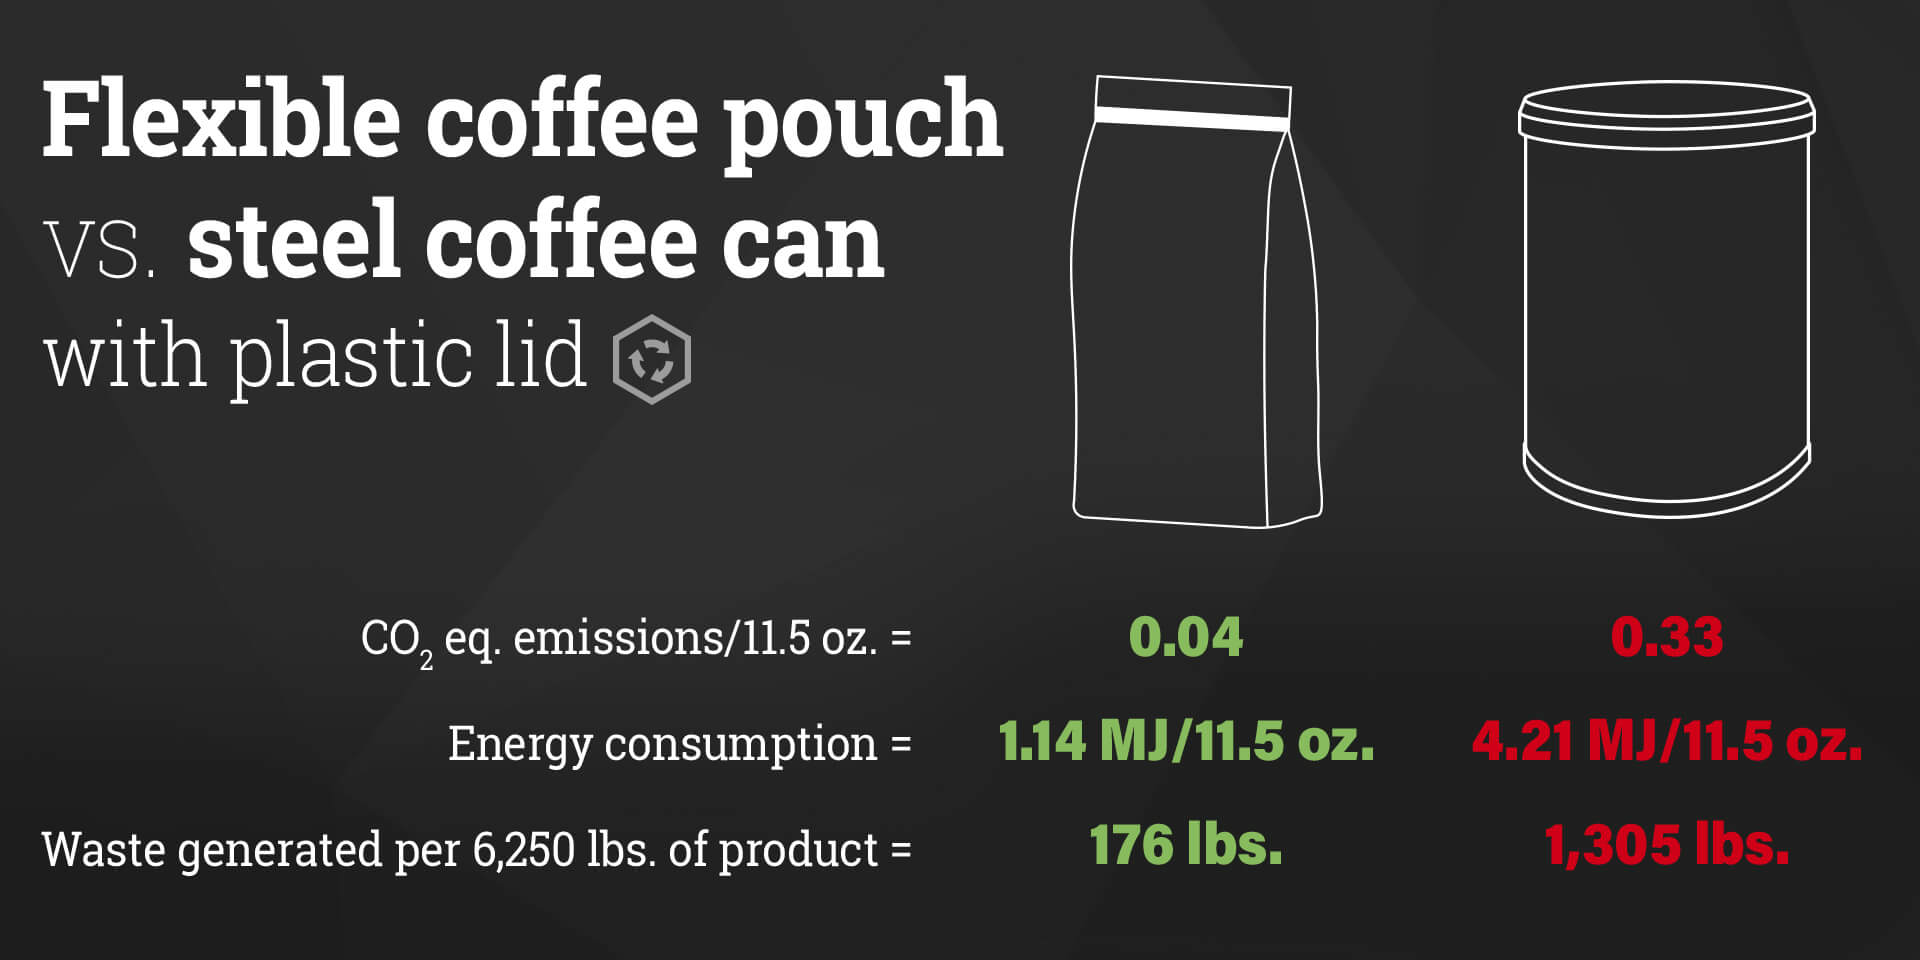 graphic showing the environmental impacts of a flexible coffee pouch verses a steel coffee can